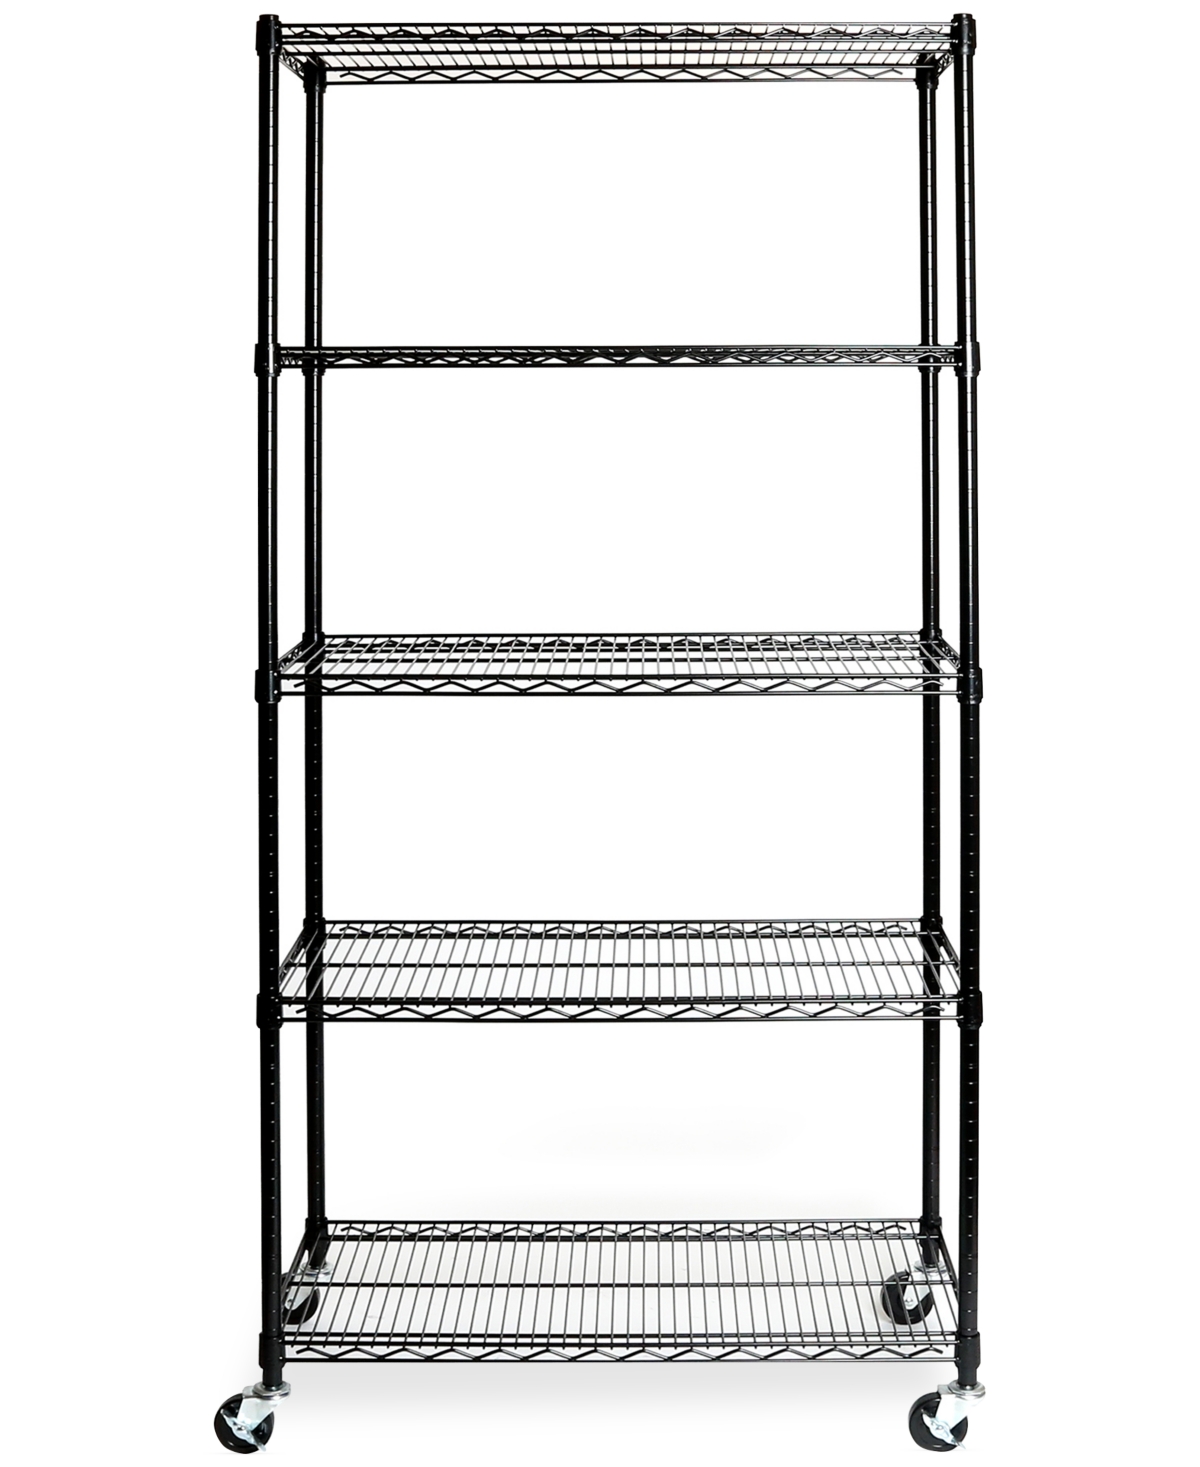 UltraDurable Commercial-Grade 5-Tier Nsf Wire Shelving with Wheels - Black